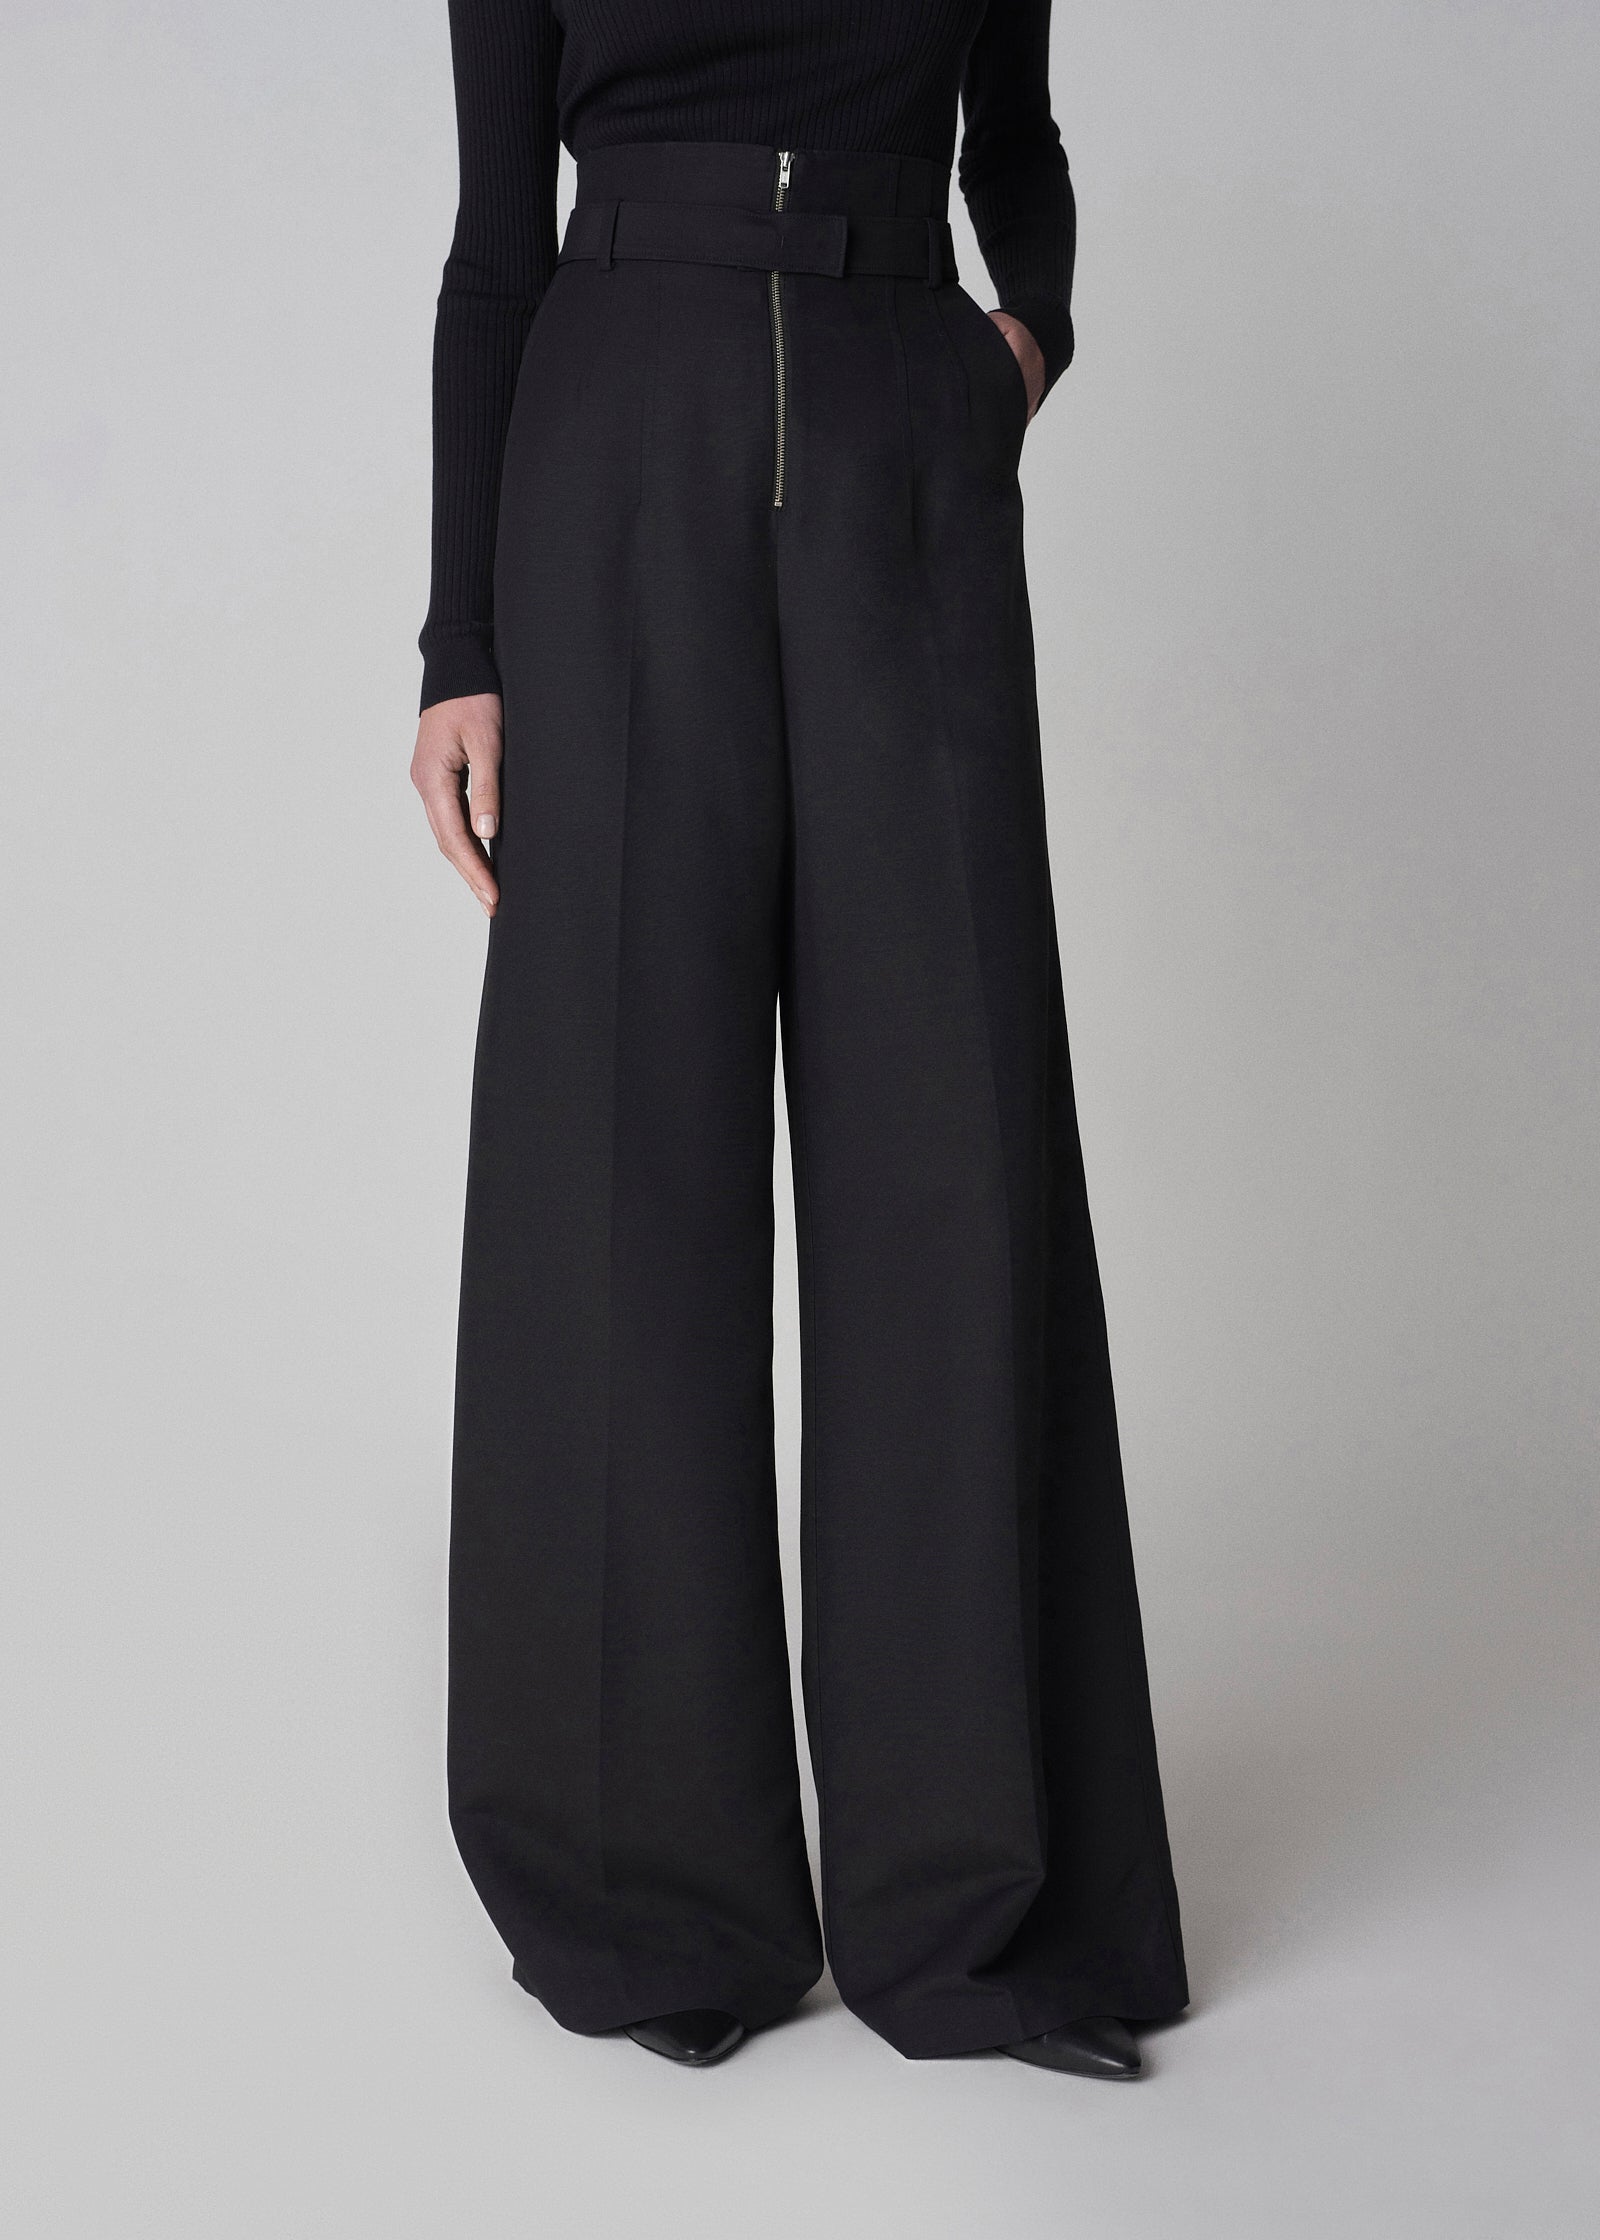 Belted Pant in Smooth Faille - Black - CO Collections